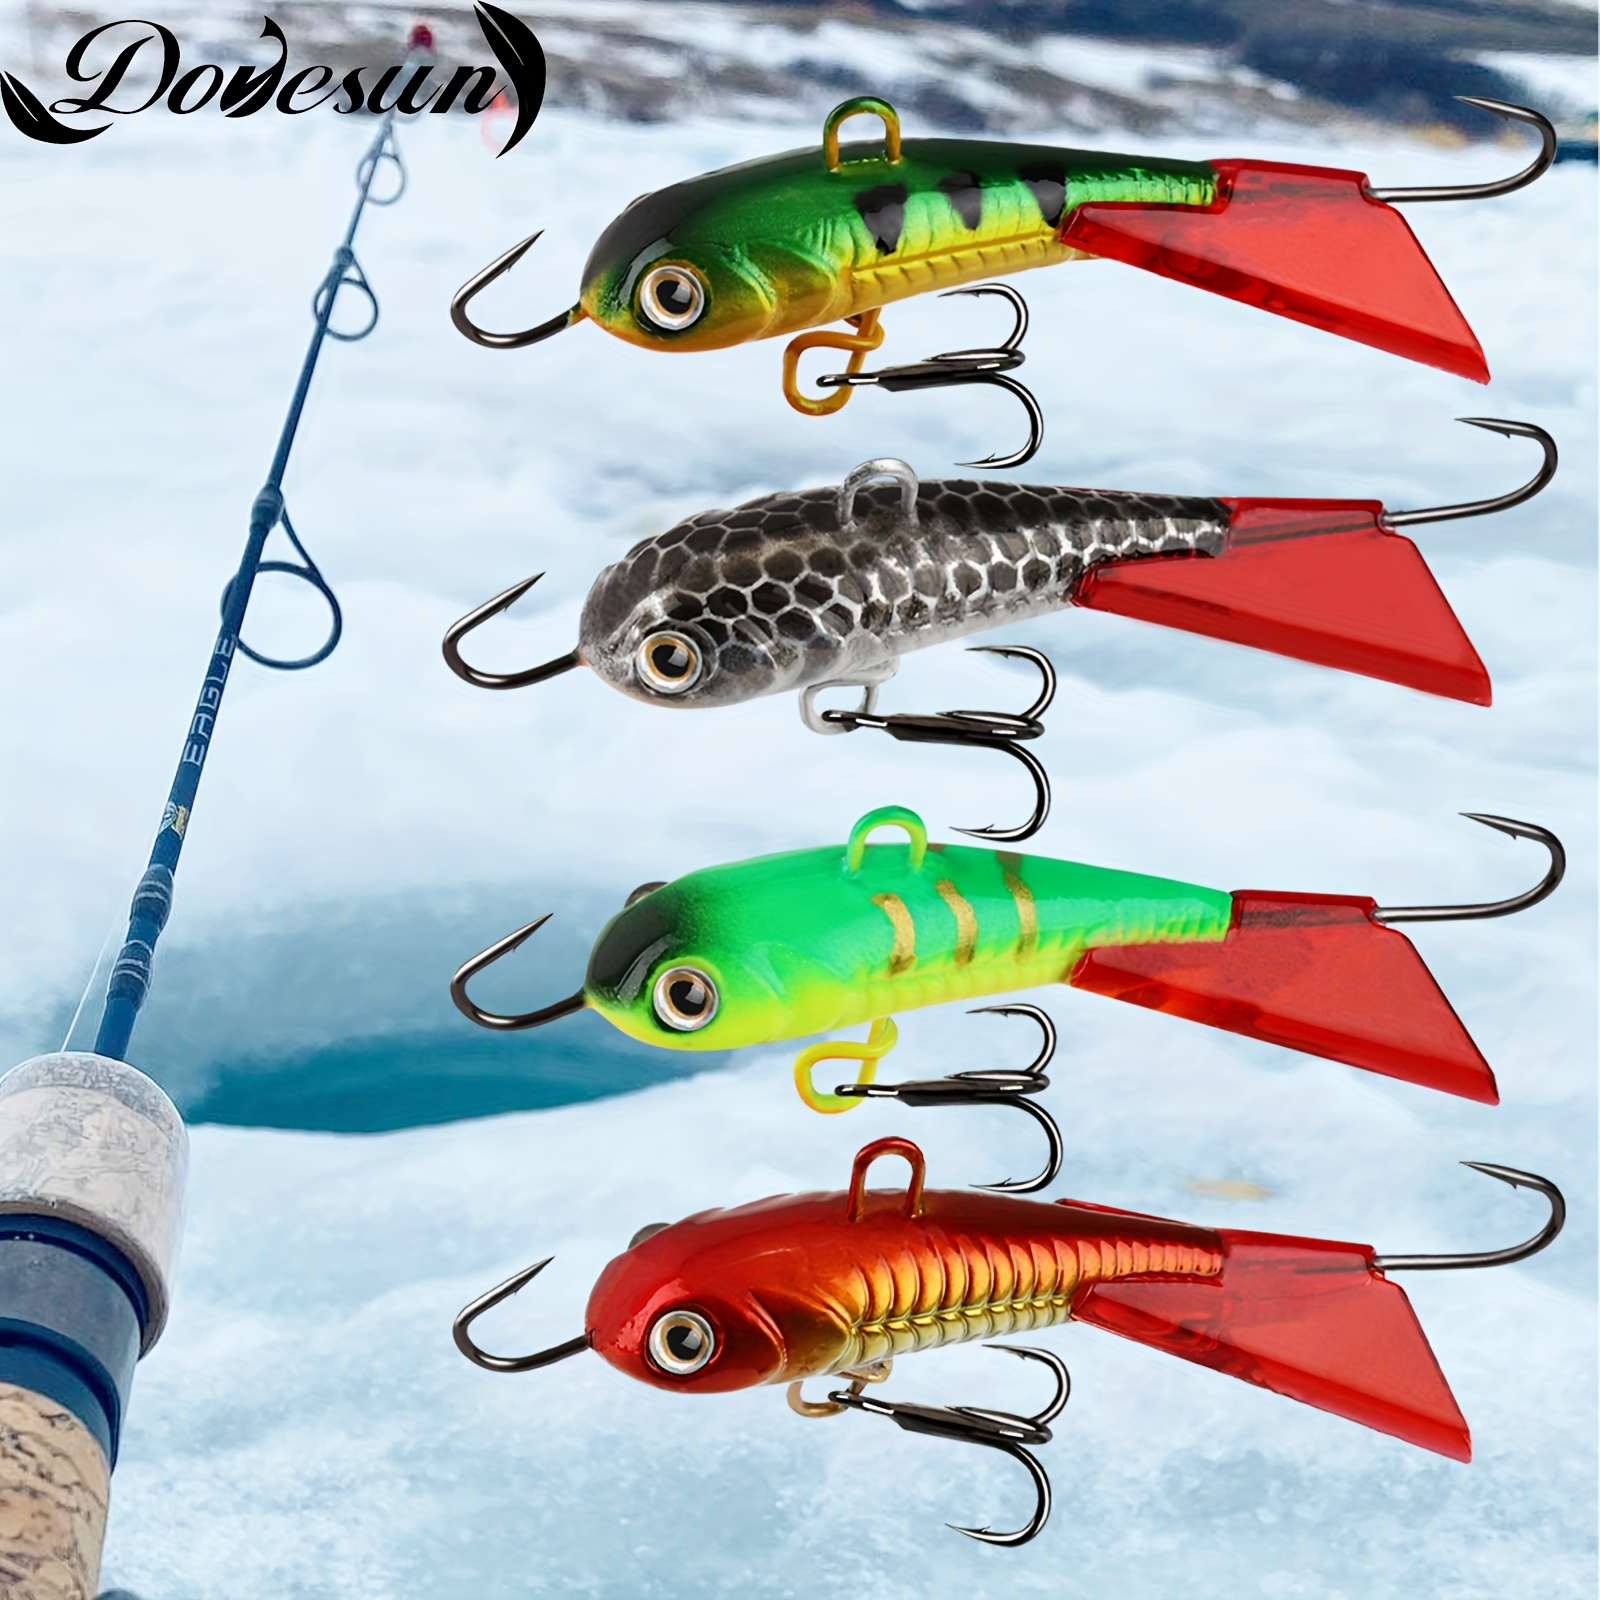 * 1pc Ice Fishing Jig, Ice Fishing Lure, Fishing Tackle For Panfish Crappie